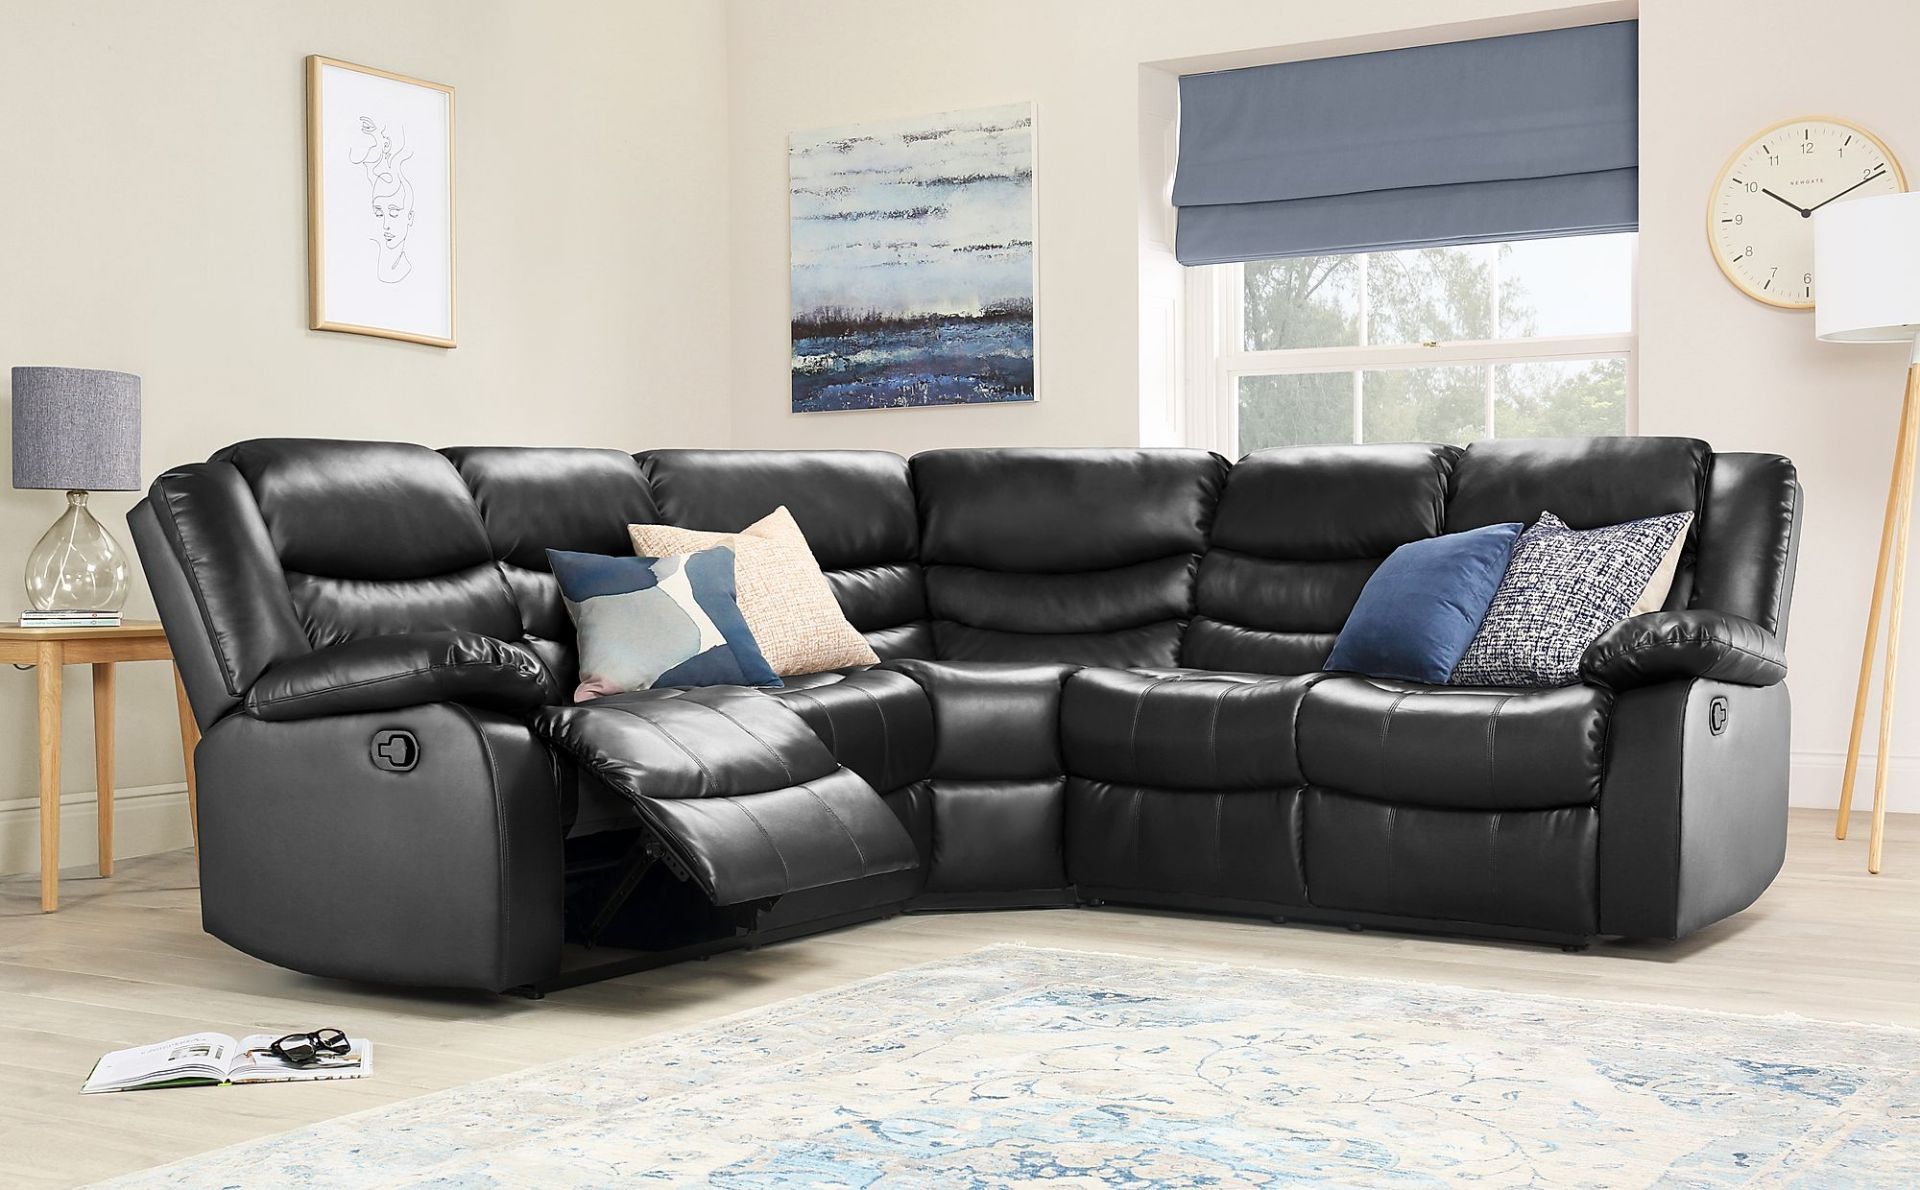 Sorrento Large Black Corner Seater Sofa - Condition report see lot zero - Packed in original